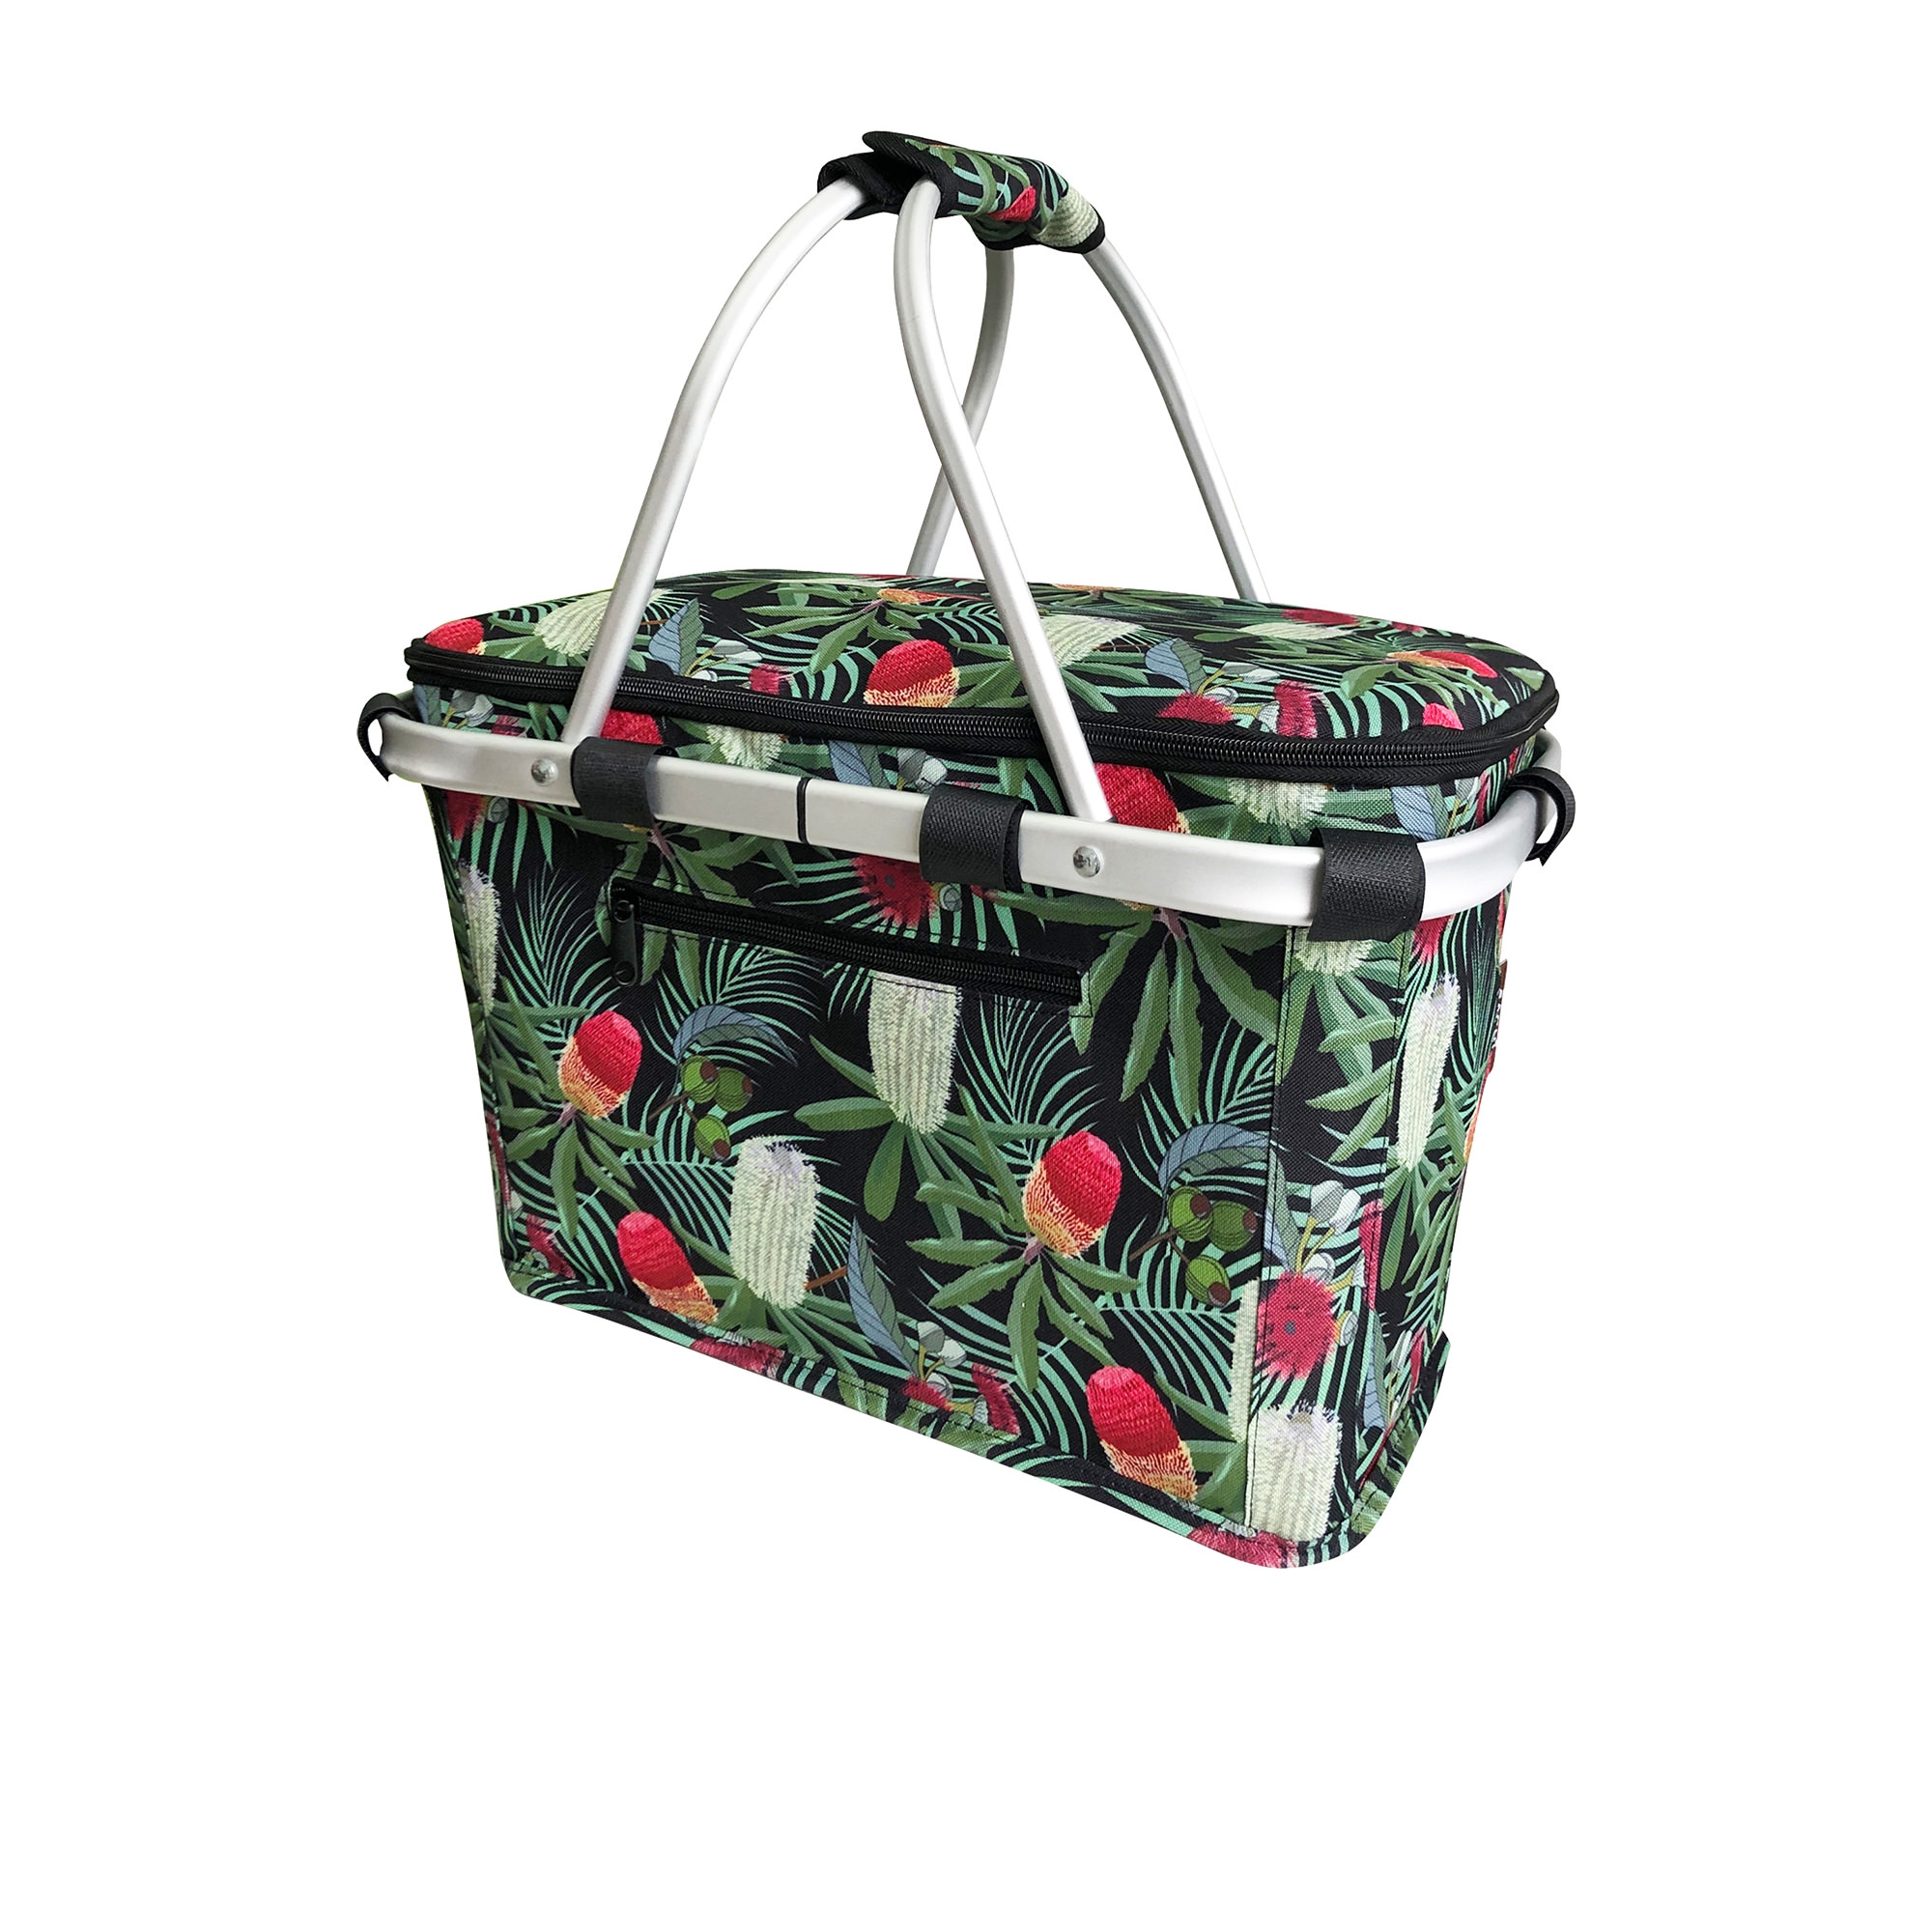 Sachi Insulated Carry Basket with Lid Banksia Image 1